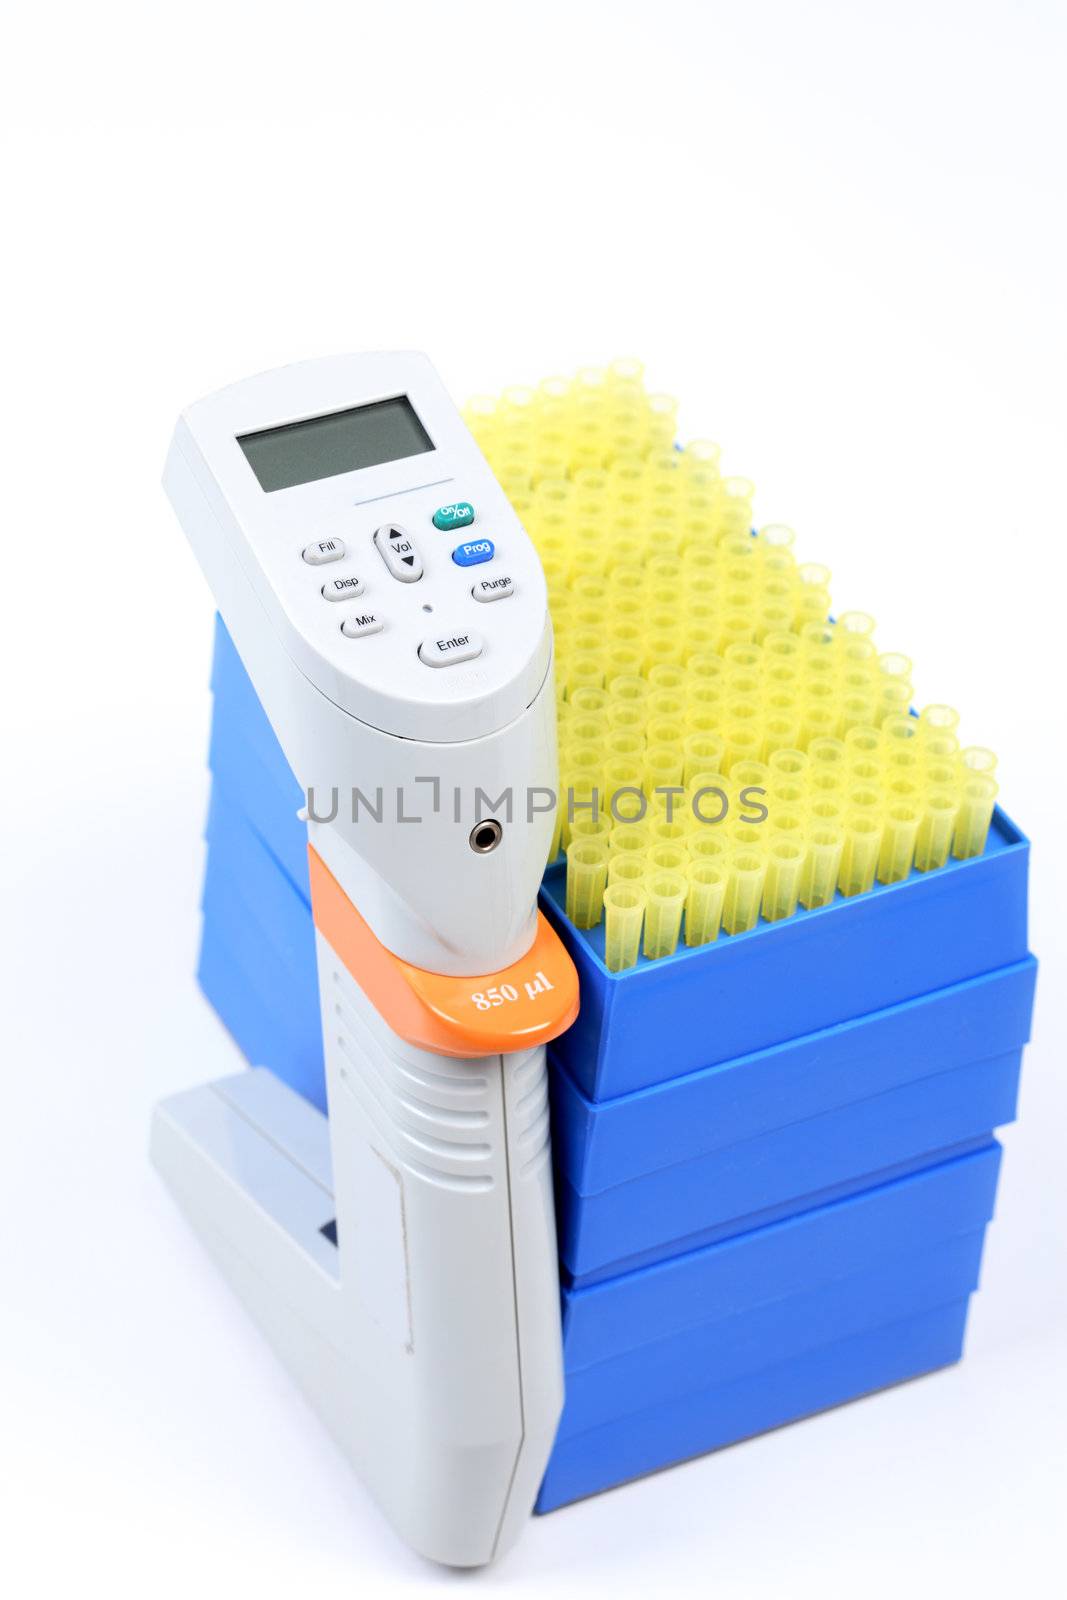 850ul 12 way pipette and racks of pipet tips. Multichannel pipettes allow you to utilize the power of electronic pipetting in microplate form.  It feature step-based programming that allows you to perform pipetting routines that would either be cumbersome or even impossible with manual pipettors